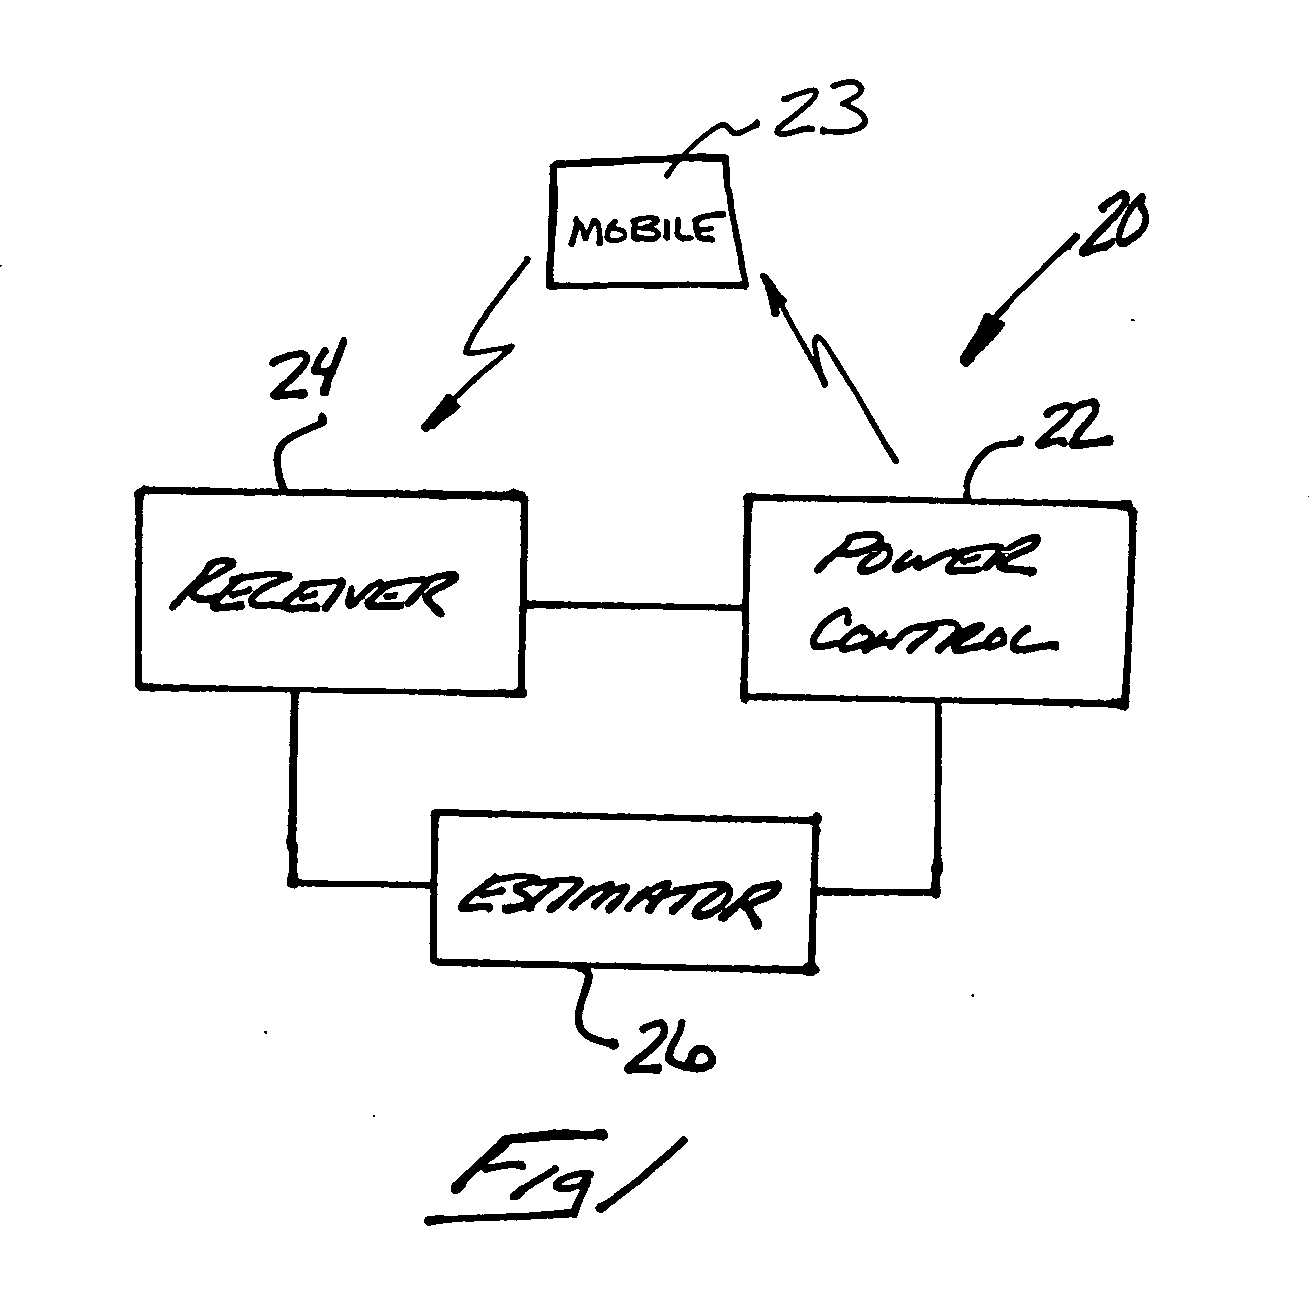 Packet error rate estimation in a communication system